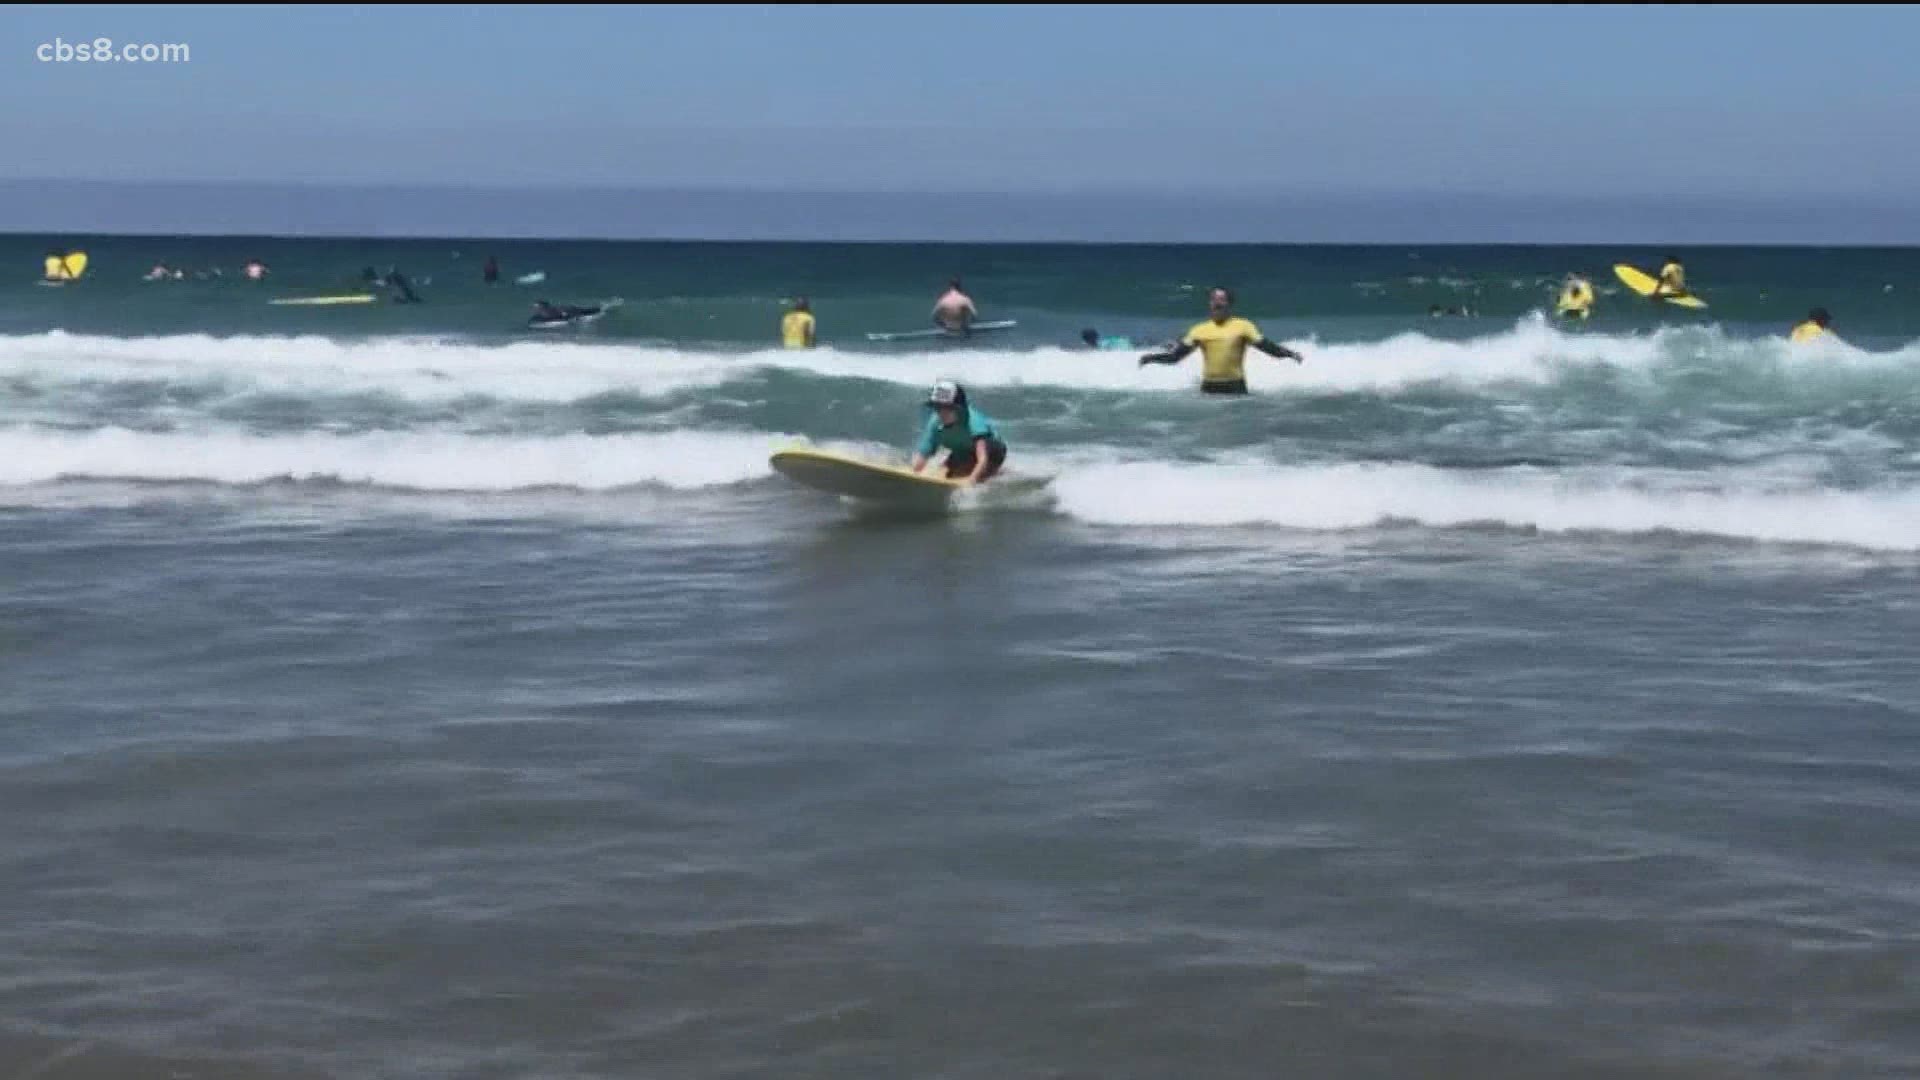 That's through camps and the like. For more information, go to https://urbansurf4kids.org/